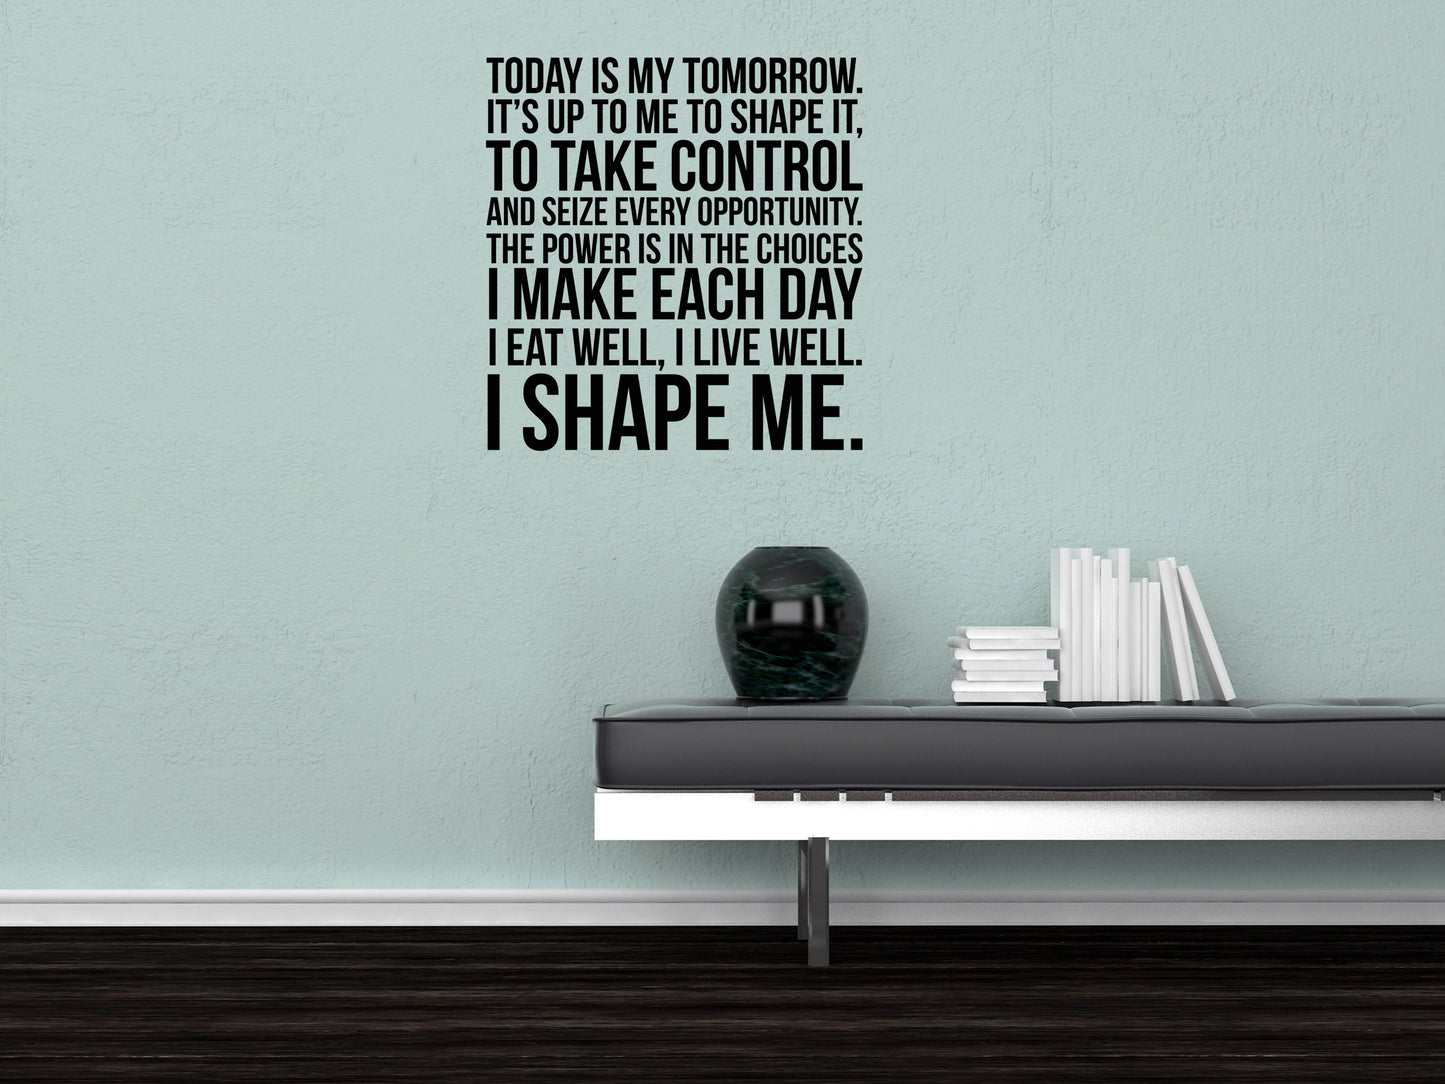 Today Is My Tomorrow Office Wall Decal - Inspirational Wall Signs Vinyl Wall Decal Inspirational Wall Signs 